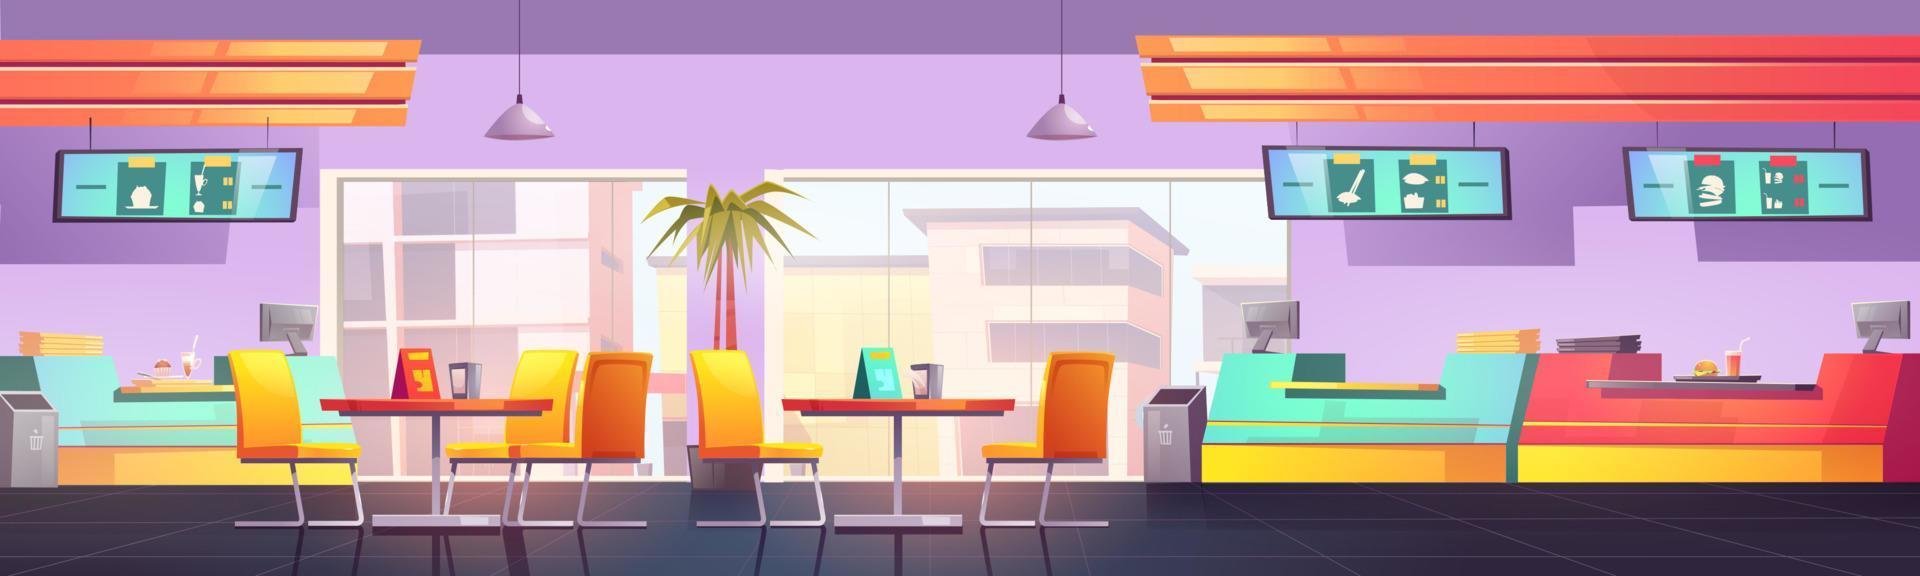 Food court with cafe and restaurants, canteen vector